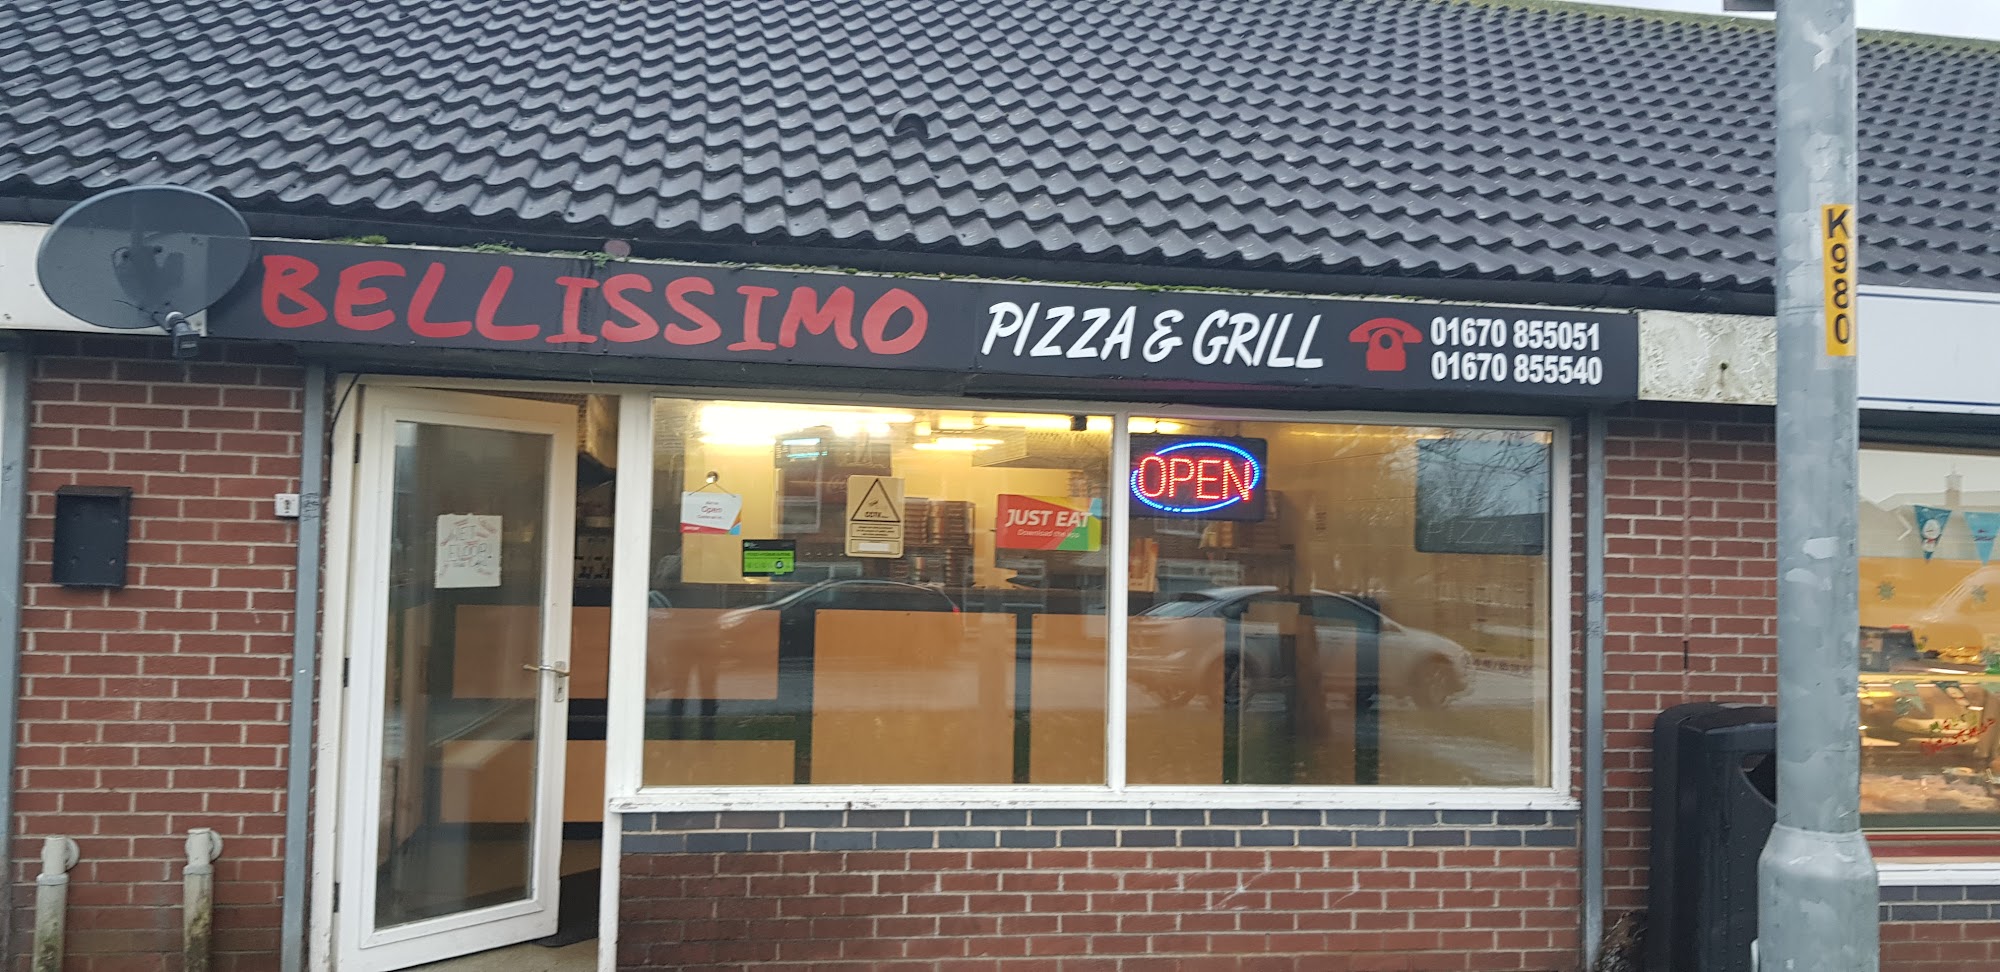 Bellissimo pizza & grill